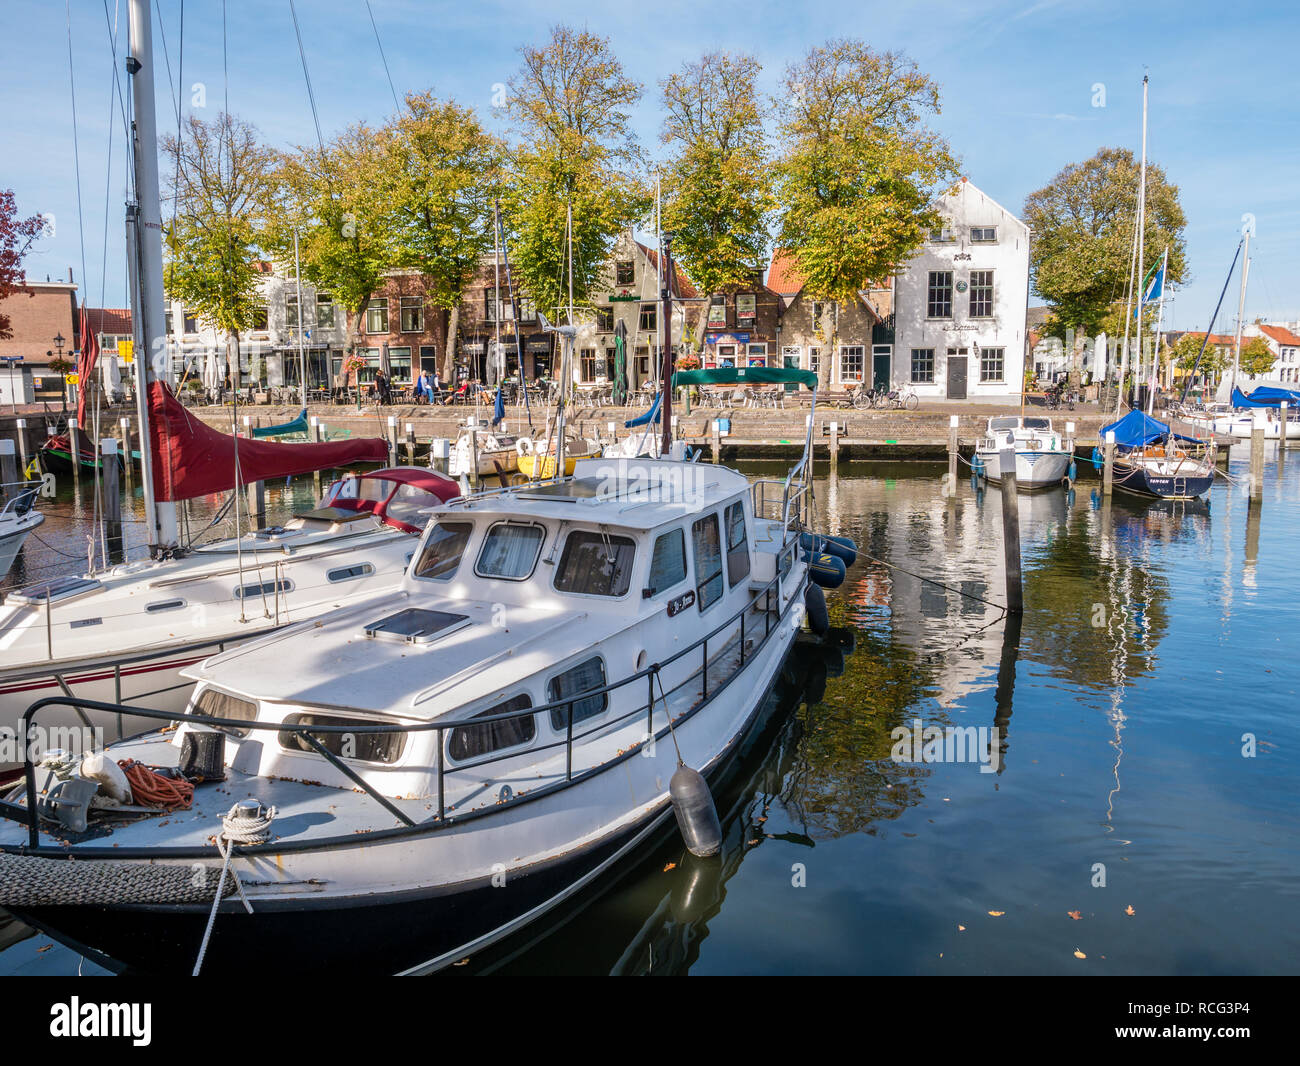 Boats moored in marina of small harbour in old town of Middelharnis on Goeree-Overflakkee, Zuid-Holland, Netherlands Stock Photo